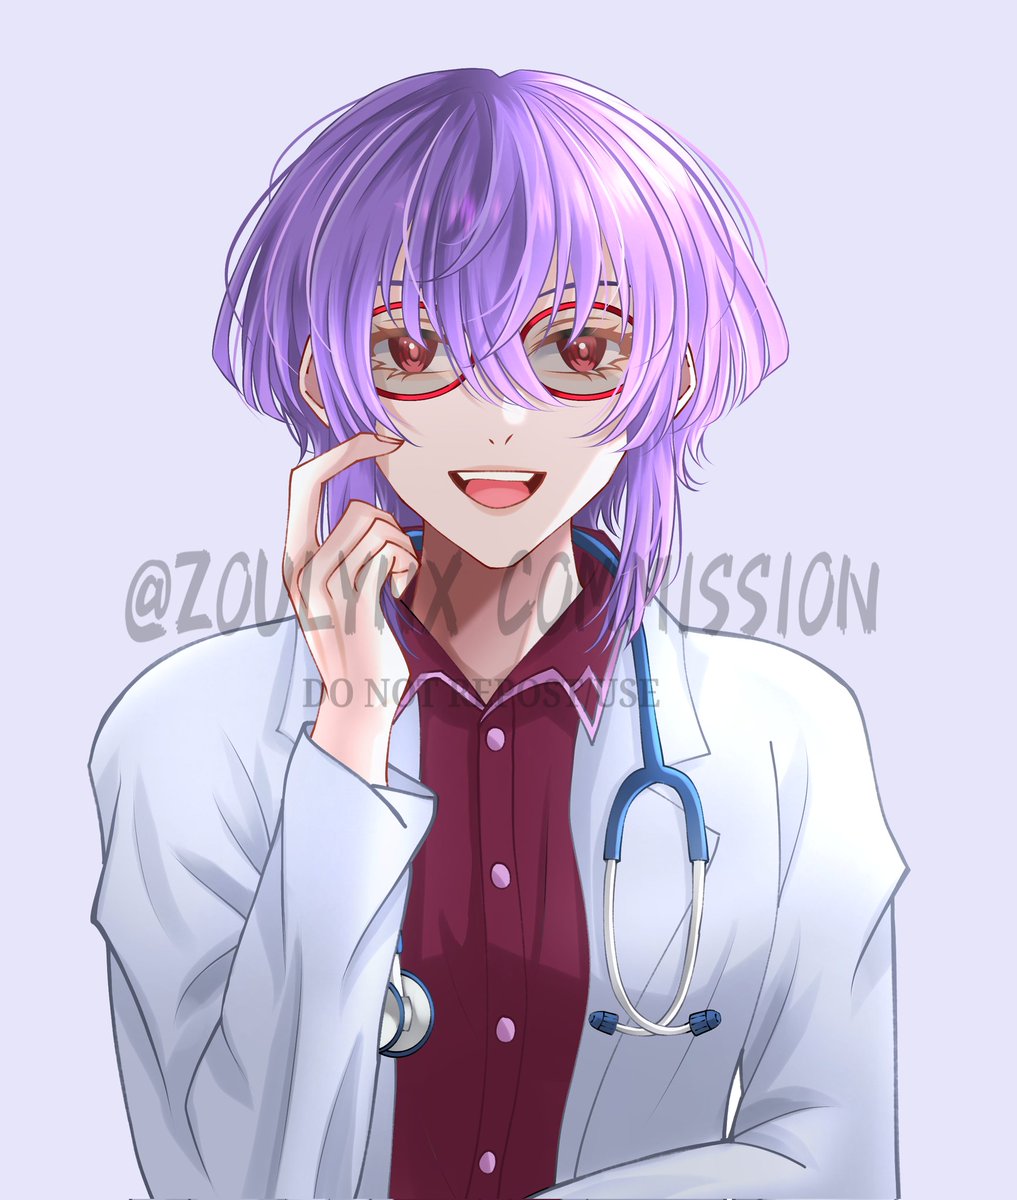 [COMMISSION RESULT]

Bust up commission for /ryxuion
Thank you for commissioning me! <3

📌Masih ada 2 slot nih. Untuk info lebih lanjut, silahkan cek pinned aku yaa📌

#commissionsopen #artidn #zonakaryaid #artistindonesia #zoulynxgallery